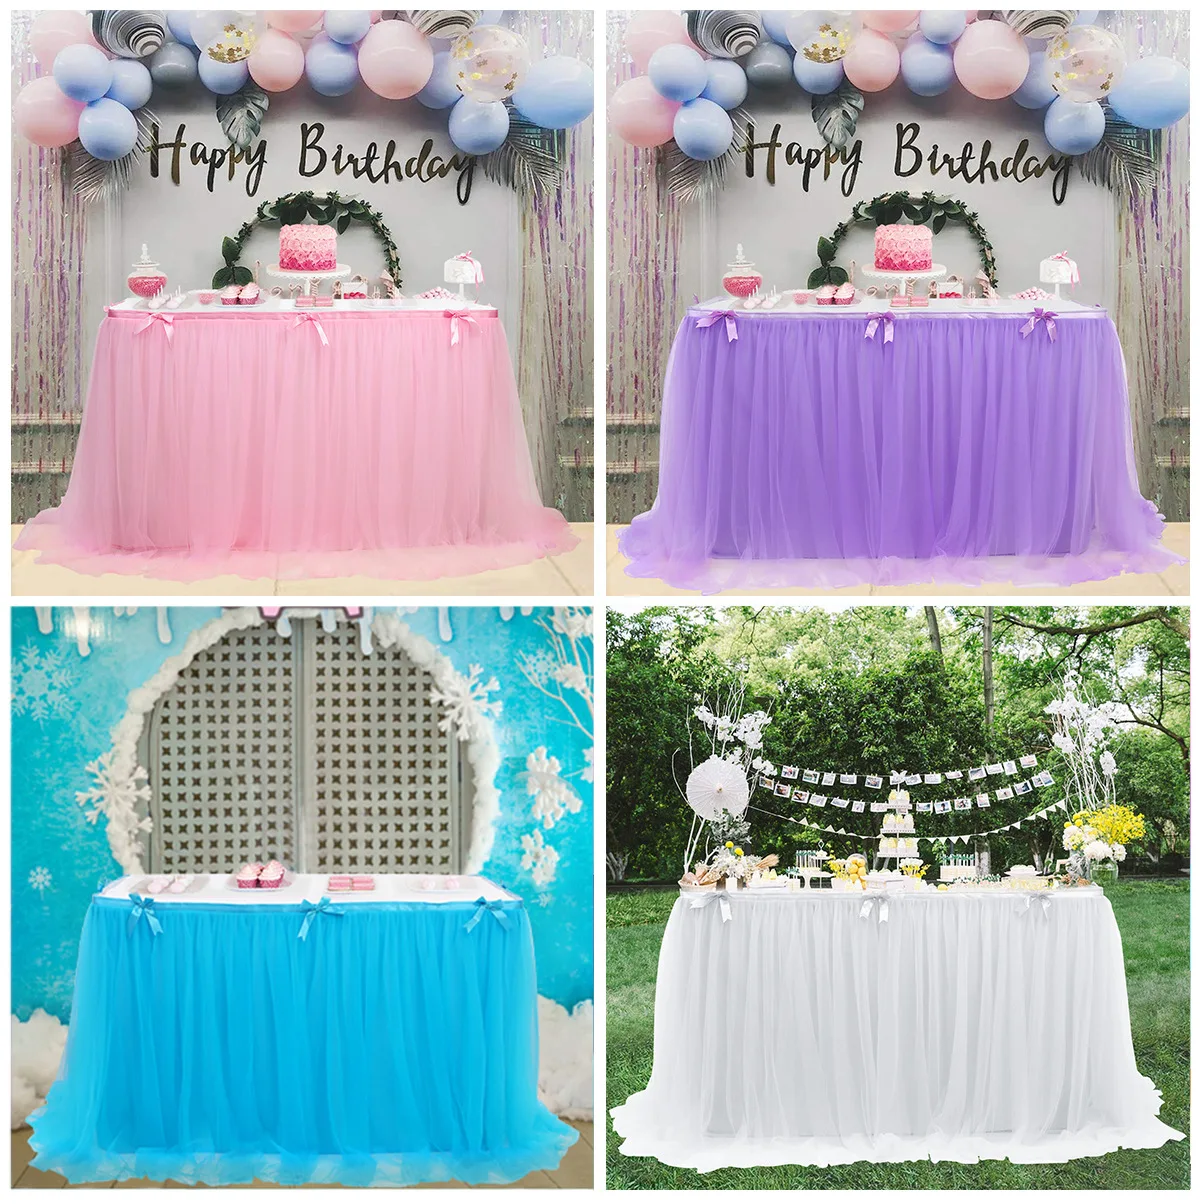 
custom hawaiian Purple pink colorful tulle tutu decoration Chiffon Table Cloth Cover Skirt Skirts for party wedding banquet  (1600231633149)